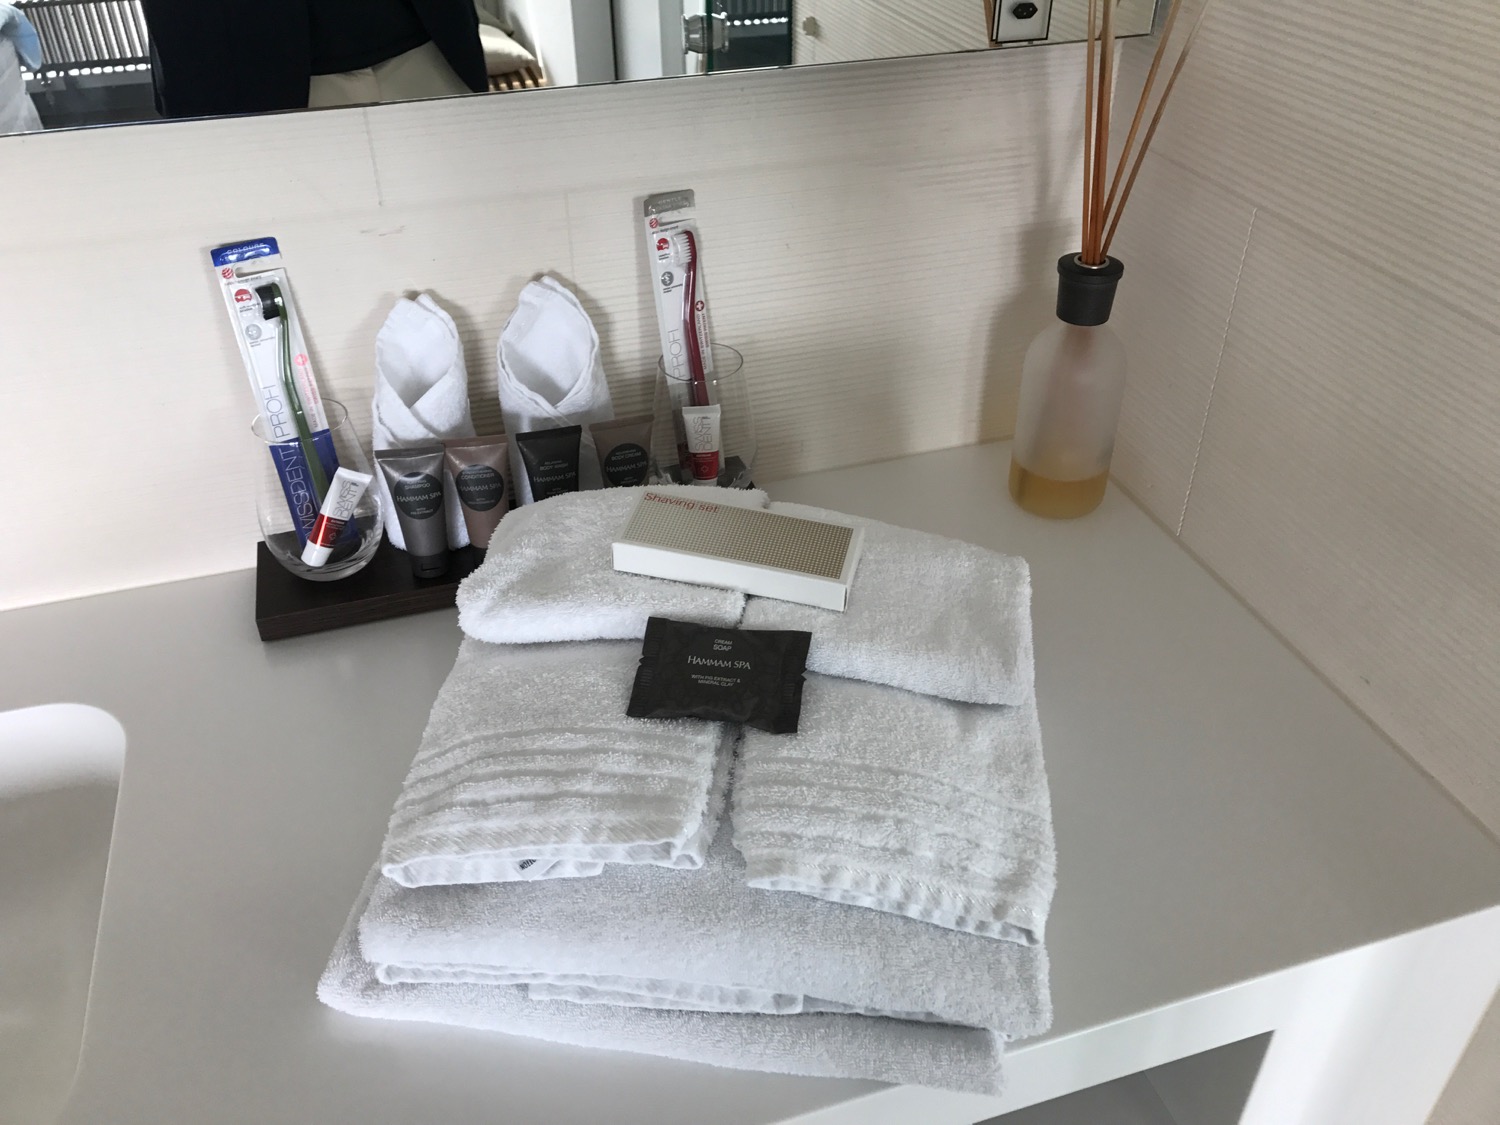 a white towel on a table